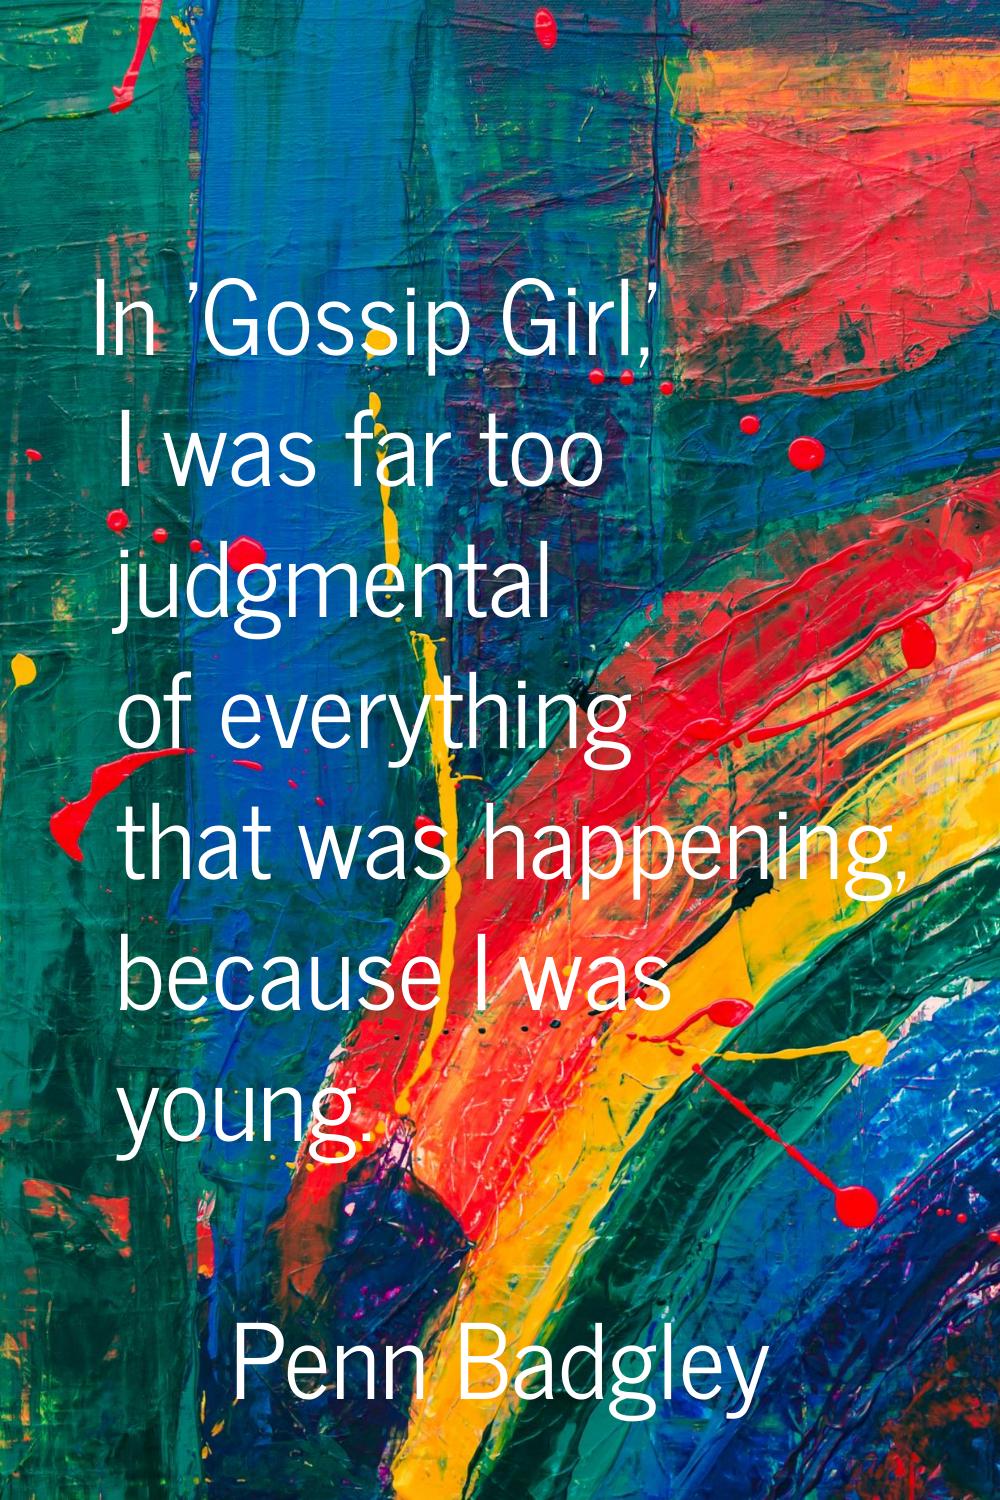 In 'Gossip Girl,' I was far too judgmental of everything that was happening, because I was young.